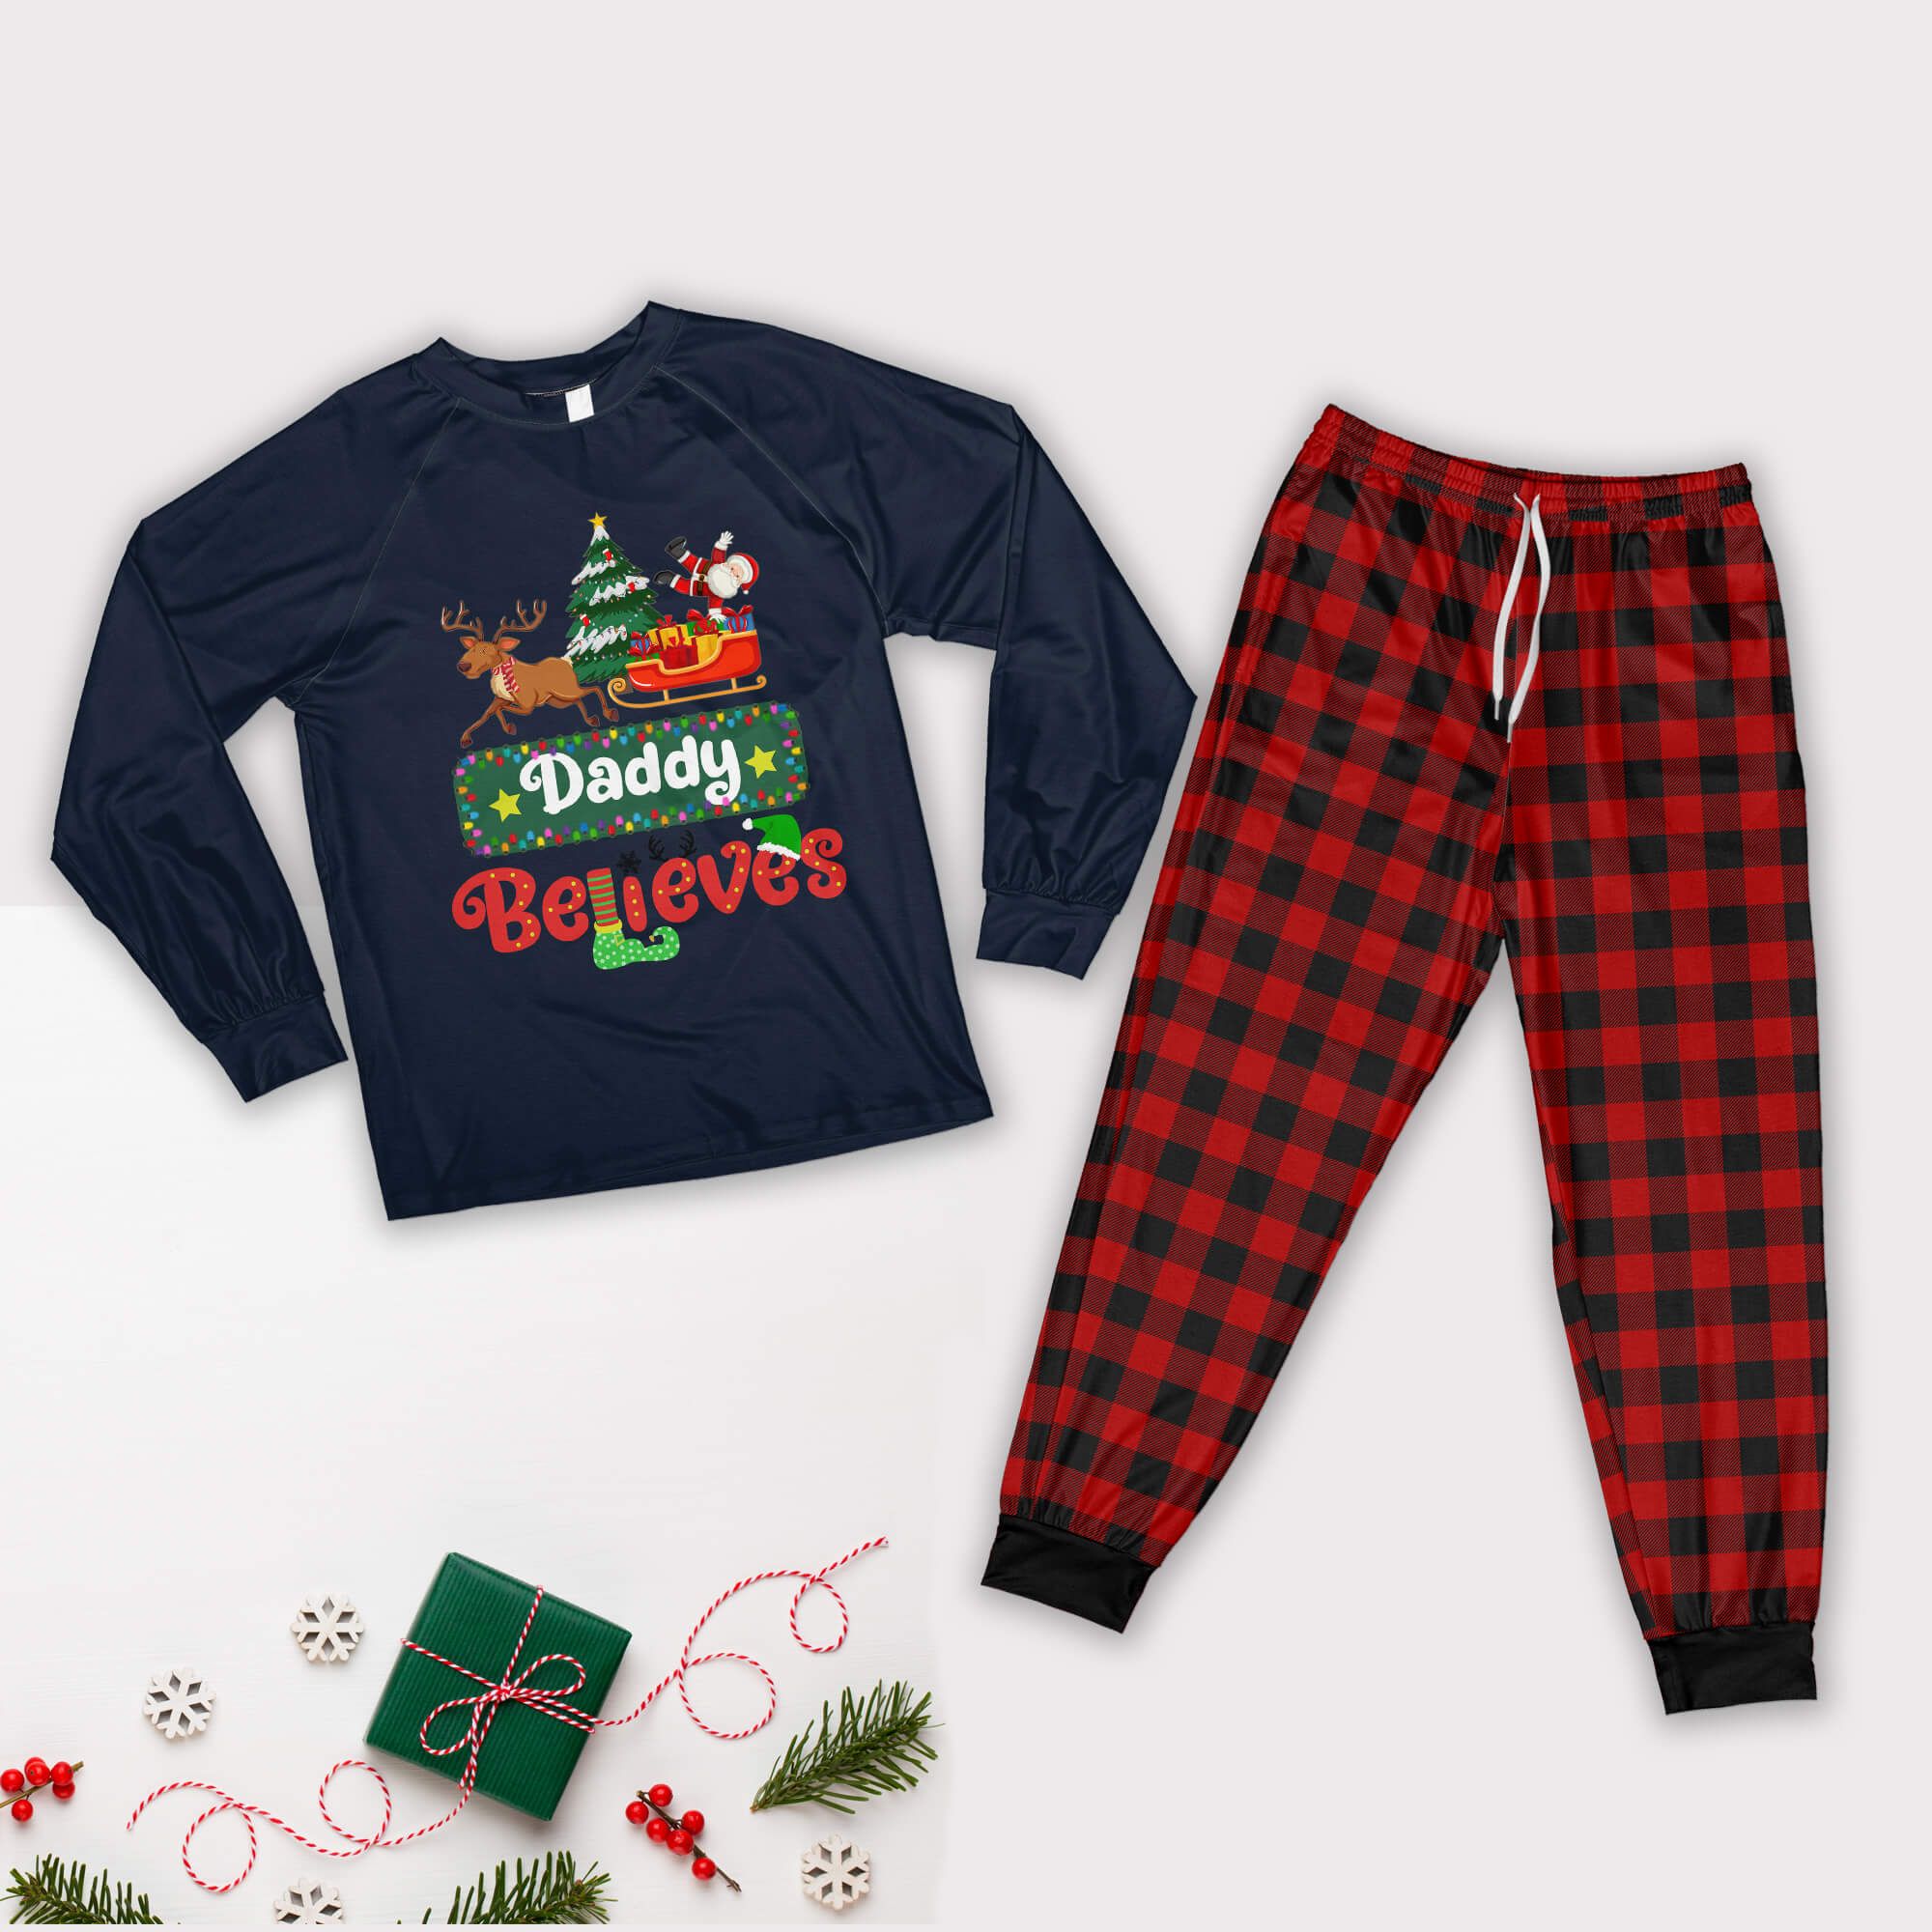 Family Believes Pajamas Personalized Names Family Christmas Pajamas Set Adult Pajamas Set Navy XS